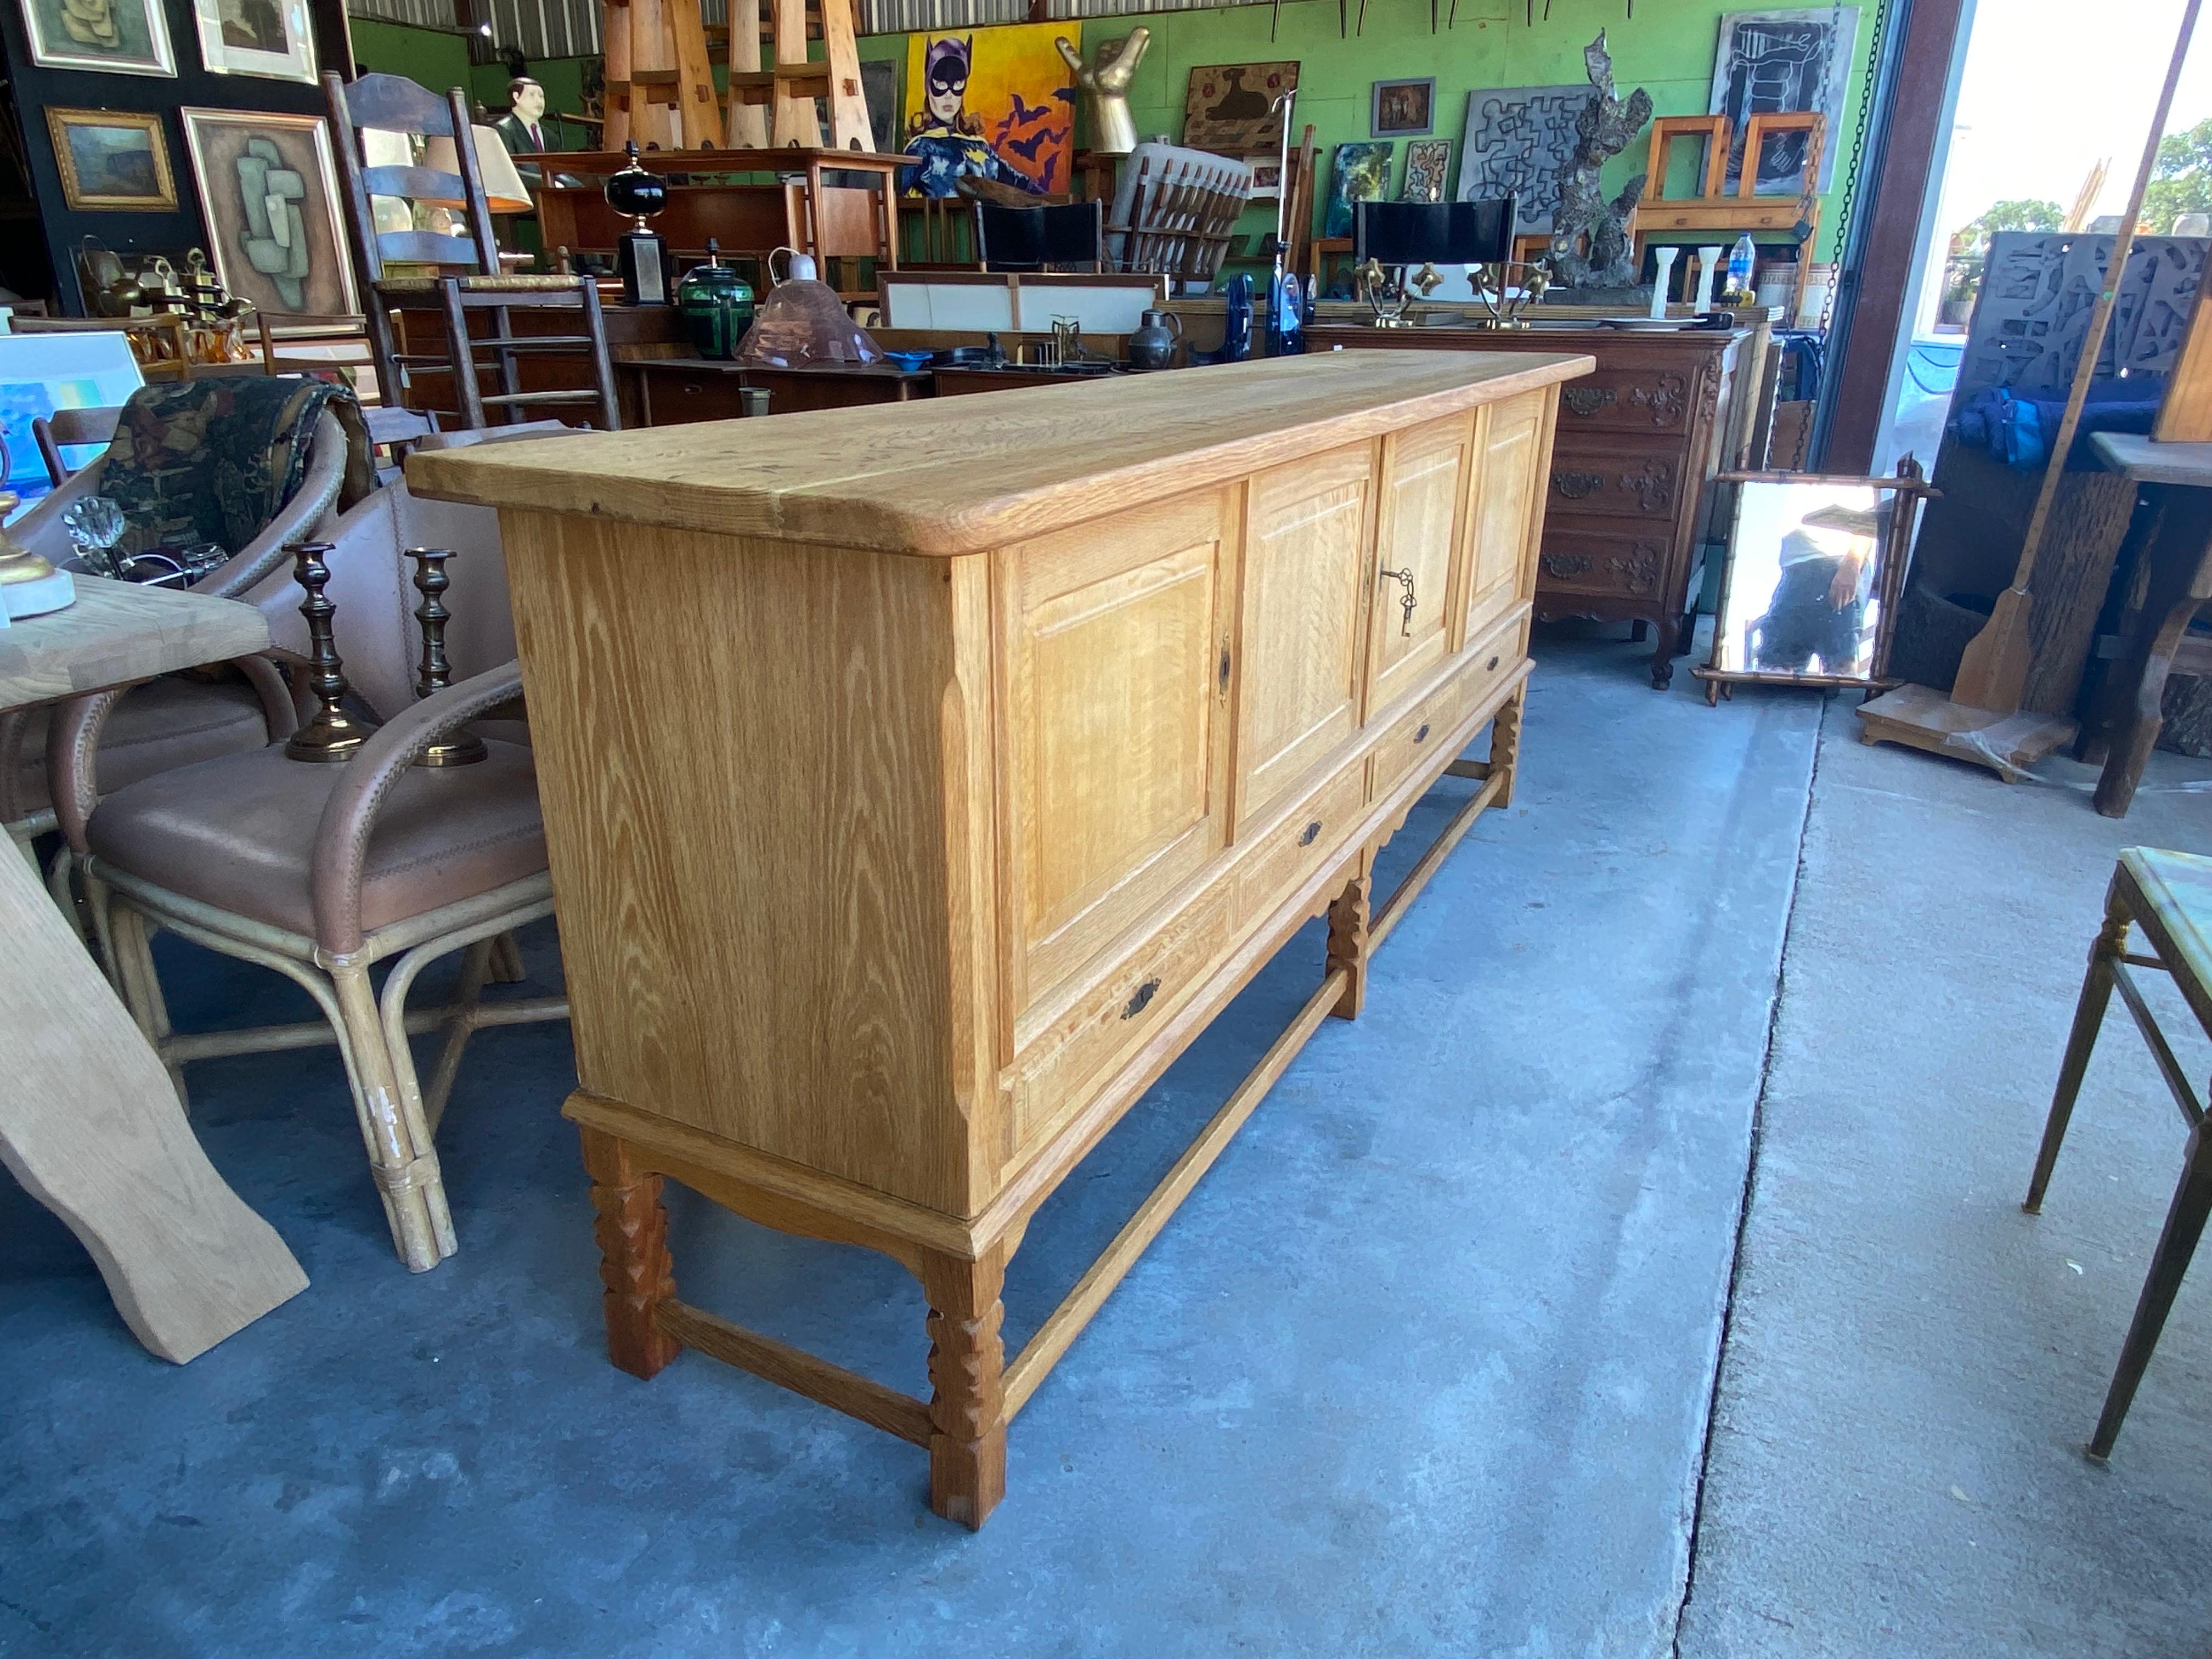 Large Danish oak sideboards, circa 1970s. This brutalist mid-century modern credenza features unique carvings along the legs and base and offers plenty of storage with adjustable shelving. There are two sideboards available.
Dimensions: 89